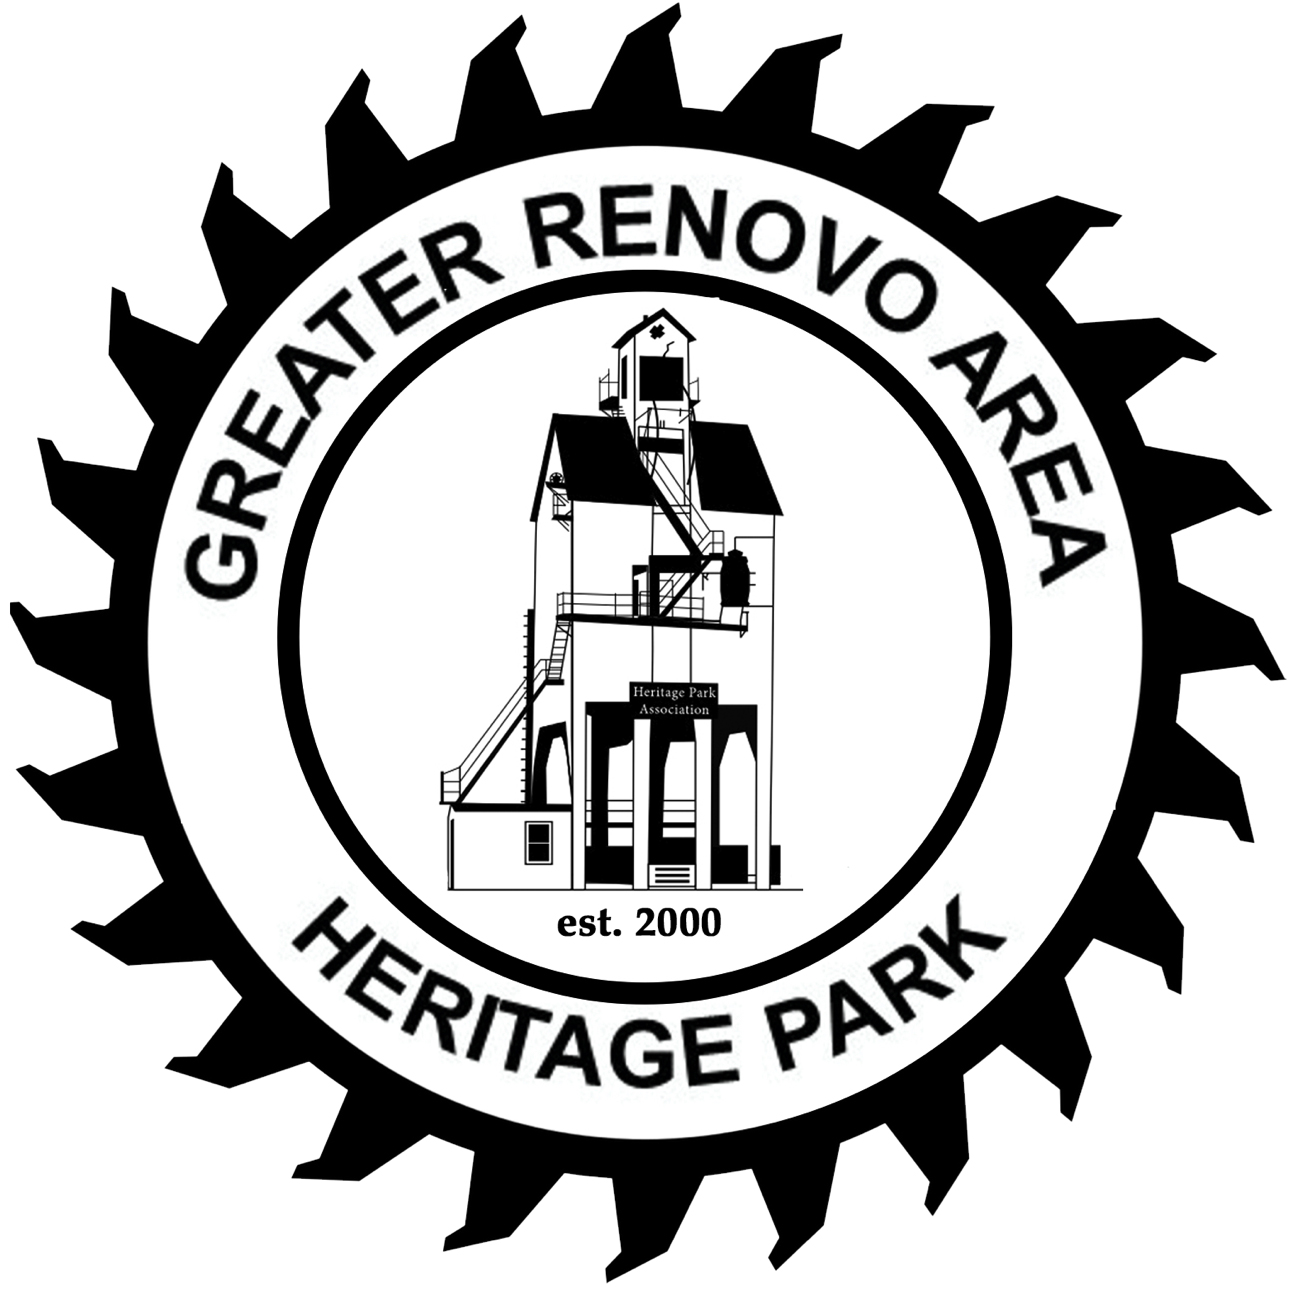 The Greater Renovo Area Heritage Park | Genealogy and Research Resources | The Greater Renovo Area Heritage Park